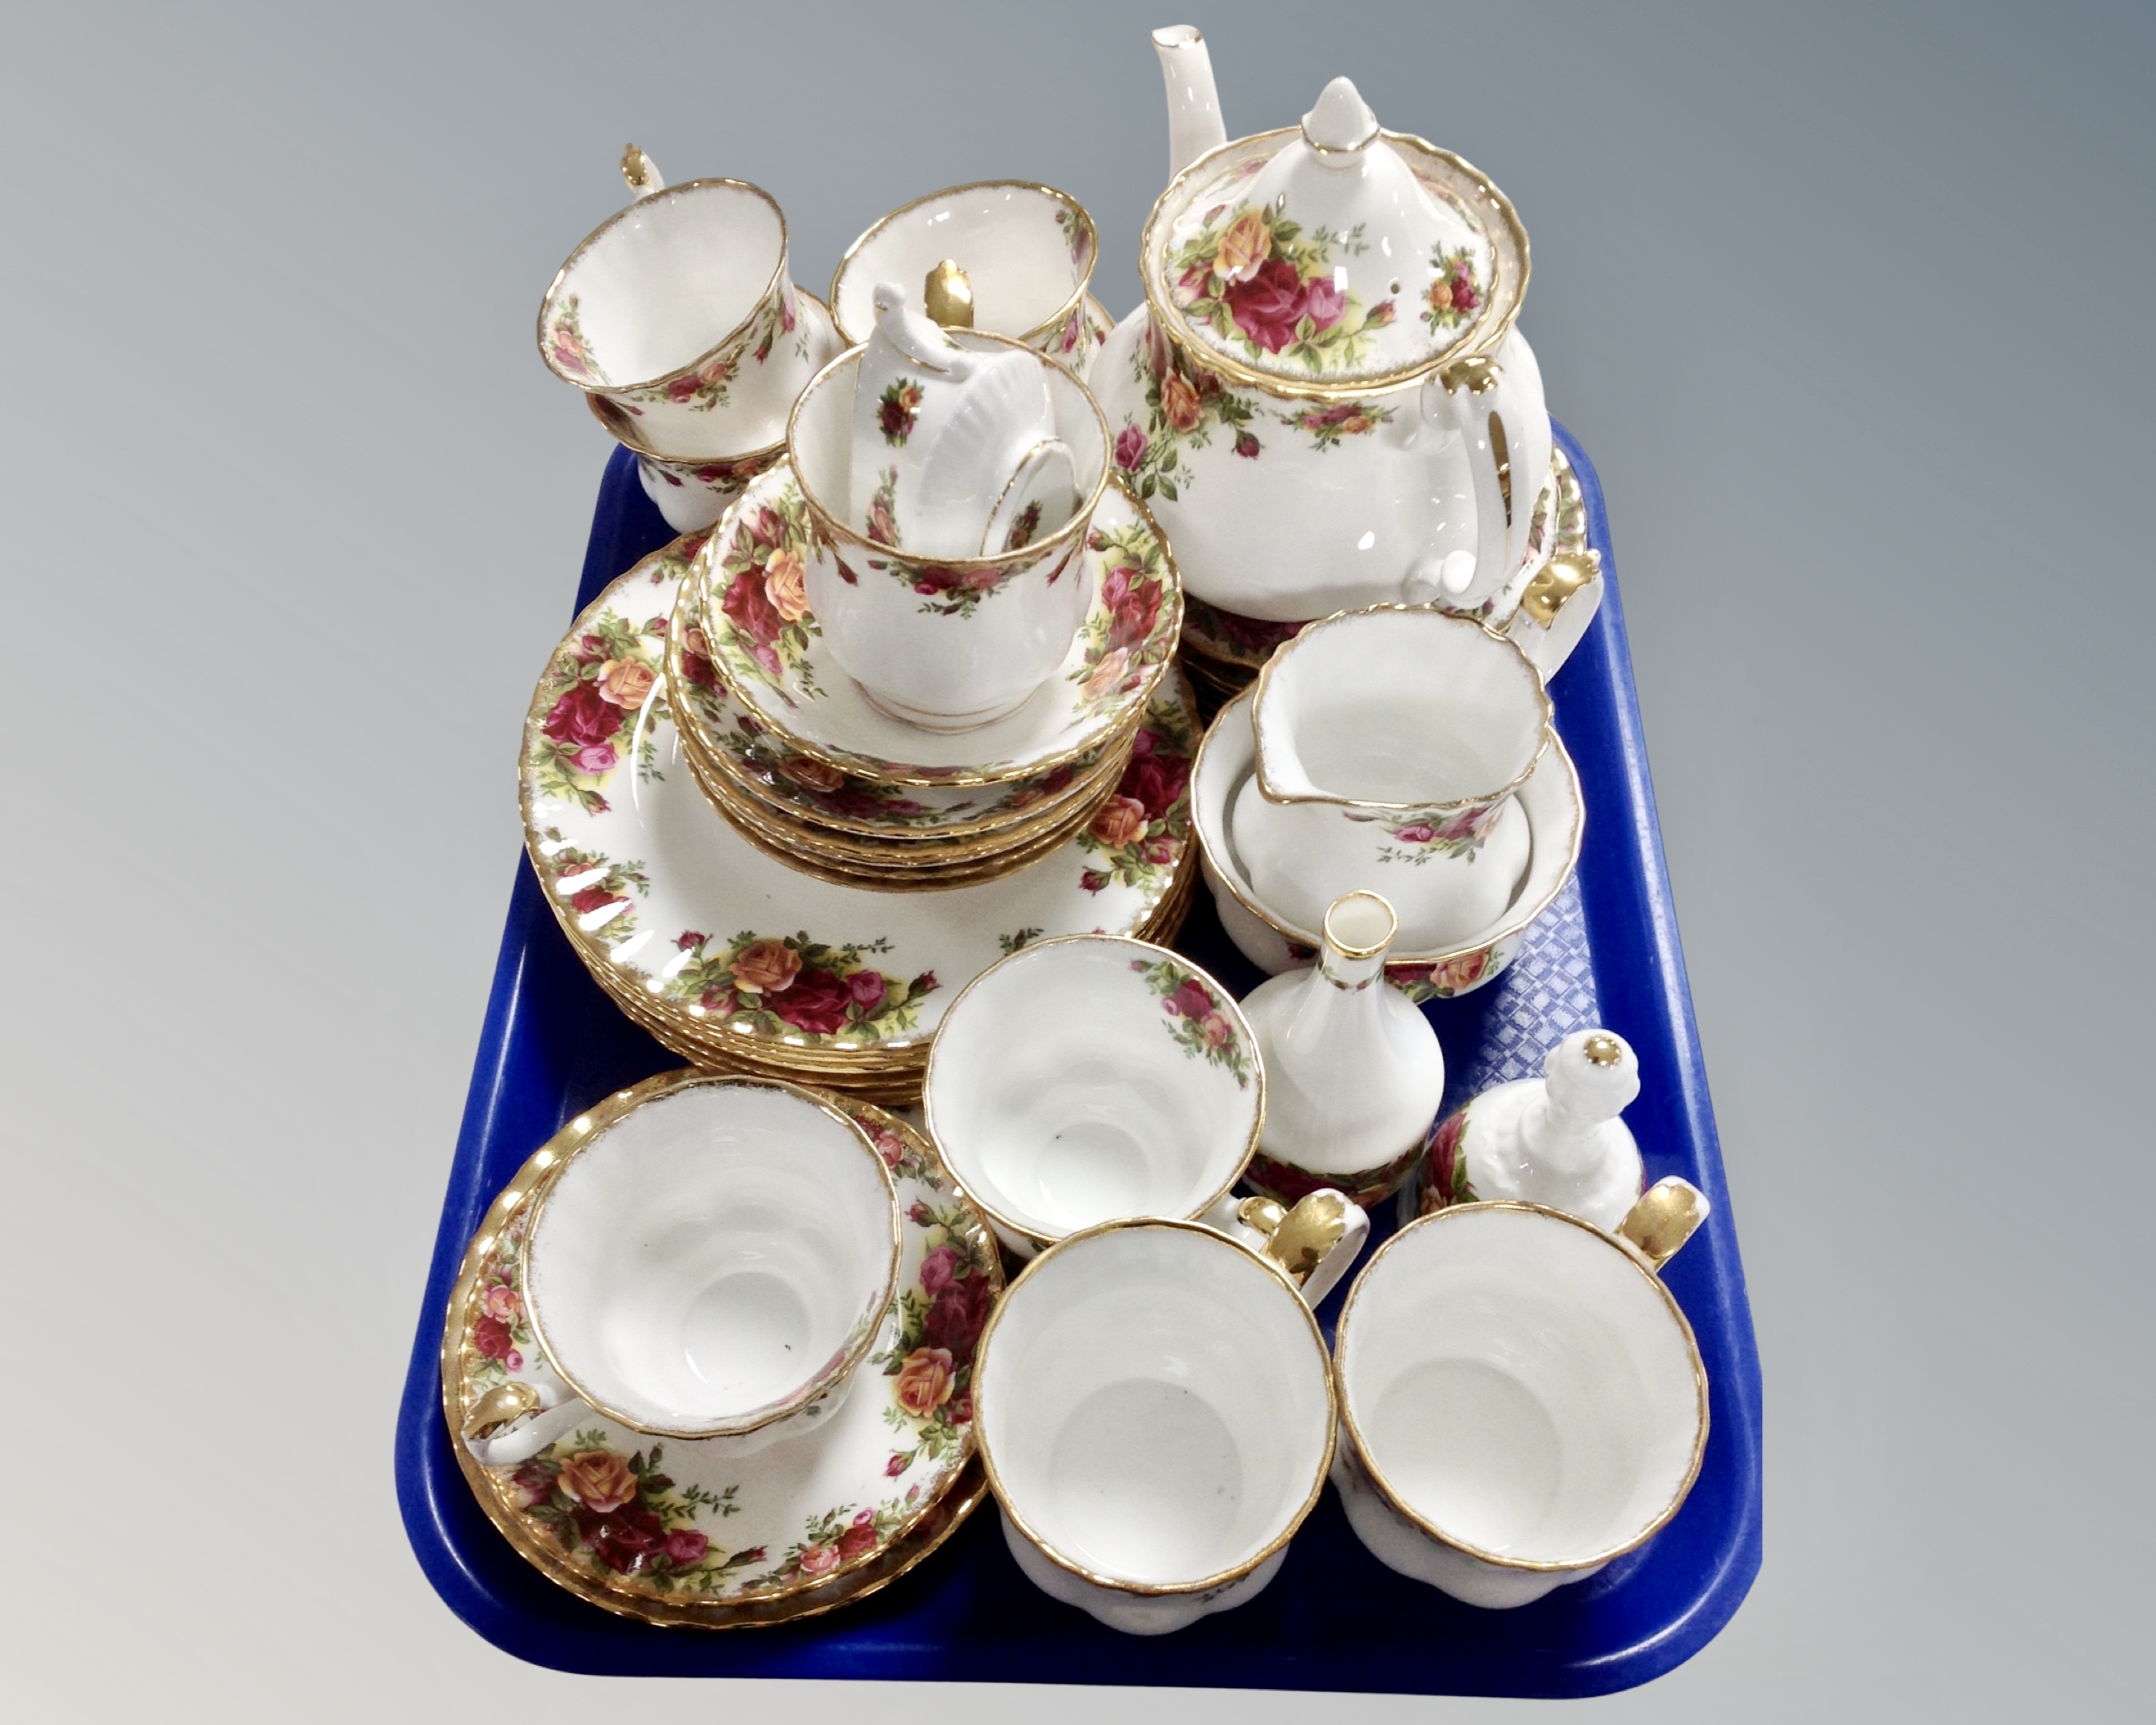 A tray of approximately 35 pieces of Royal Albert Old Country Roses tea china.